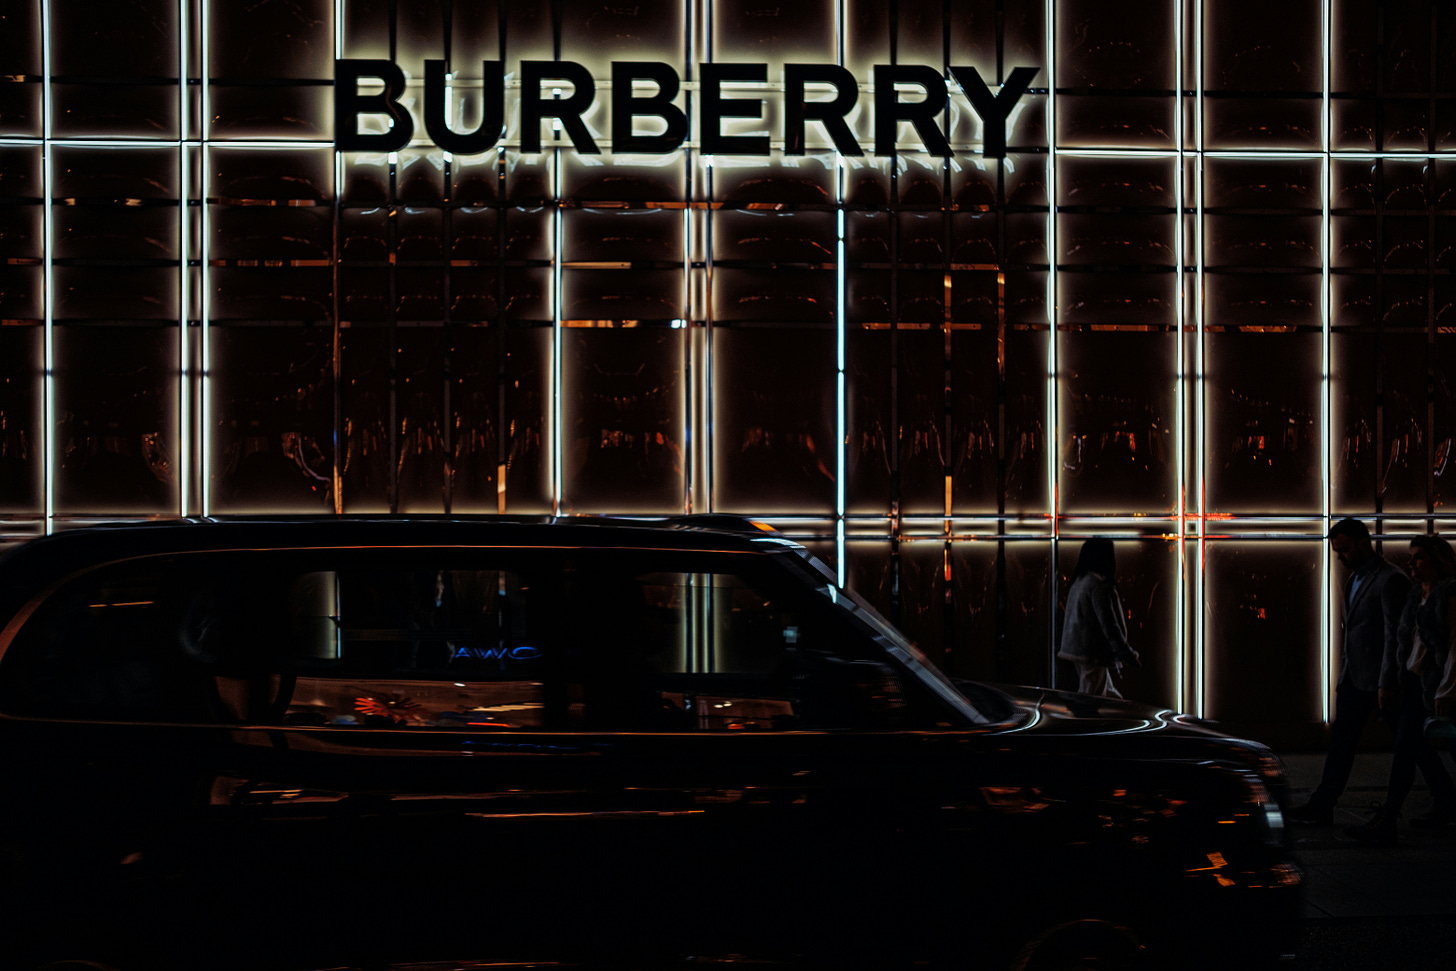 A black car parked in front of a Burberry building photo